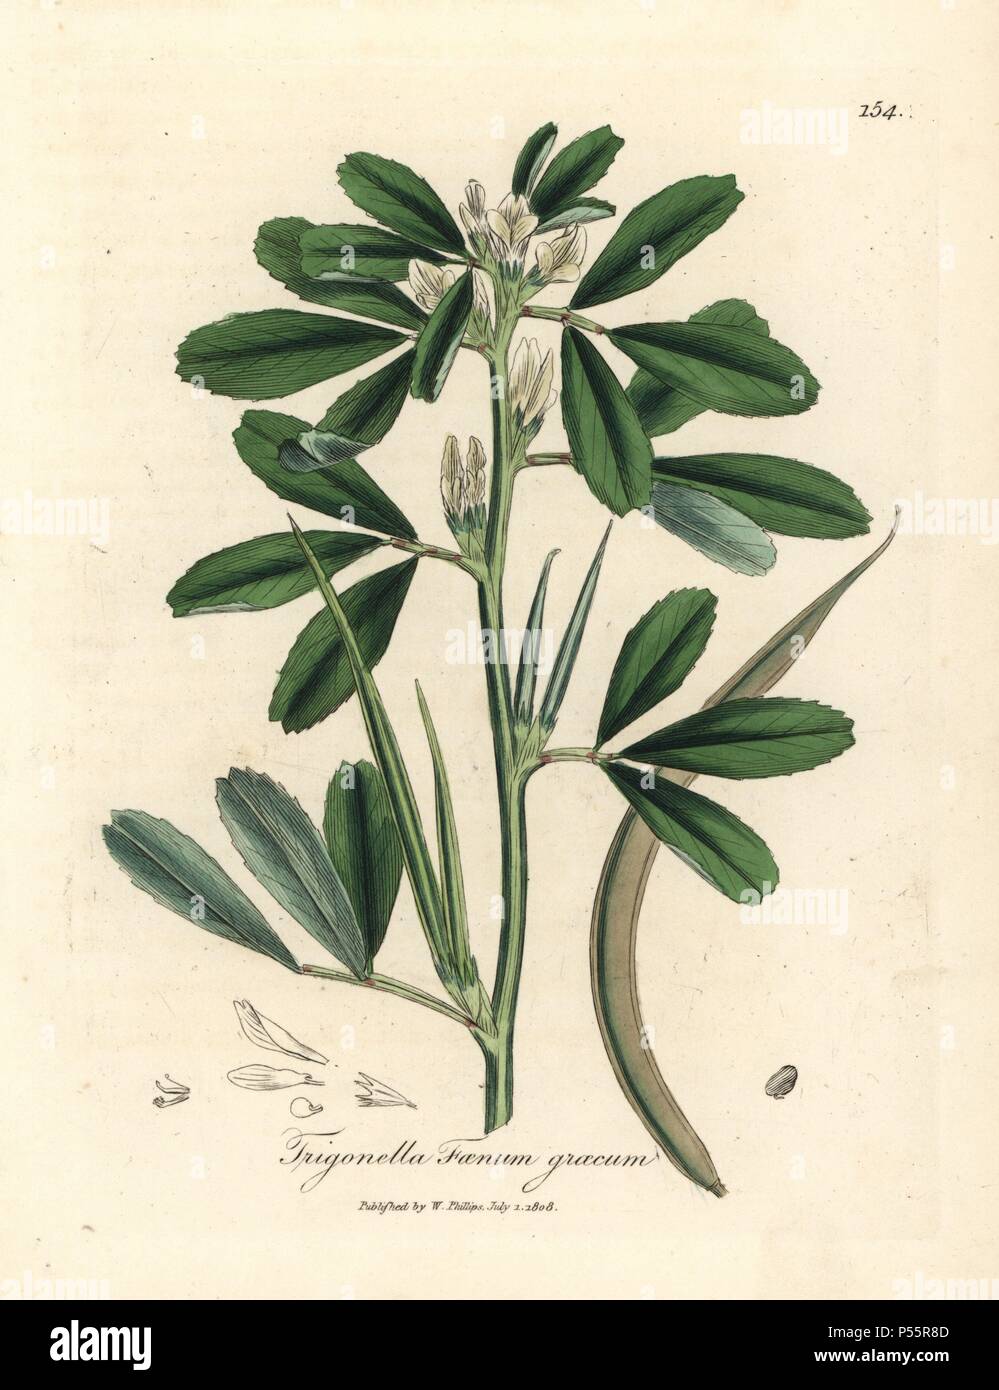 White flowered fenugreek with seed pod, Trigonella foenum graecum. Handcolored copperplate engraving from a botanical illustration by James Sowerby from William Woodville and Sir William Jackson Hooker's 'Medical Botany' 1832. The tireless Sowerby (1757-1822) drew over 2,500 plants for Smith's mammoth 'English Botany' (1790-1814) and 440 mushrooms for 'Coloured Figures of English Fungi ' (1797) among many other works. Stock Photo